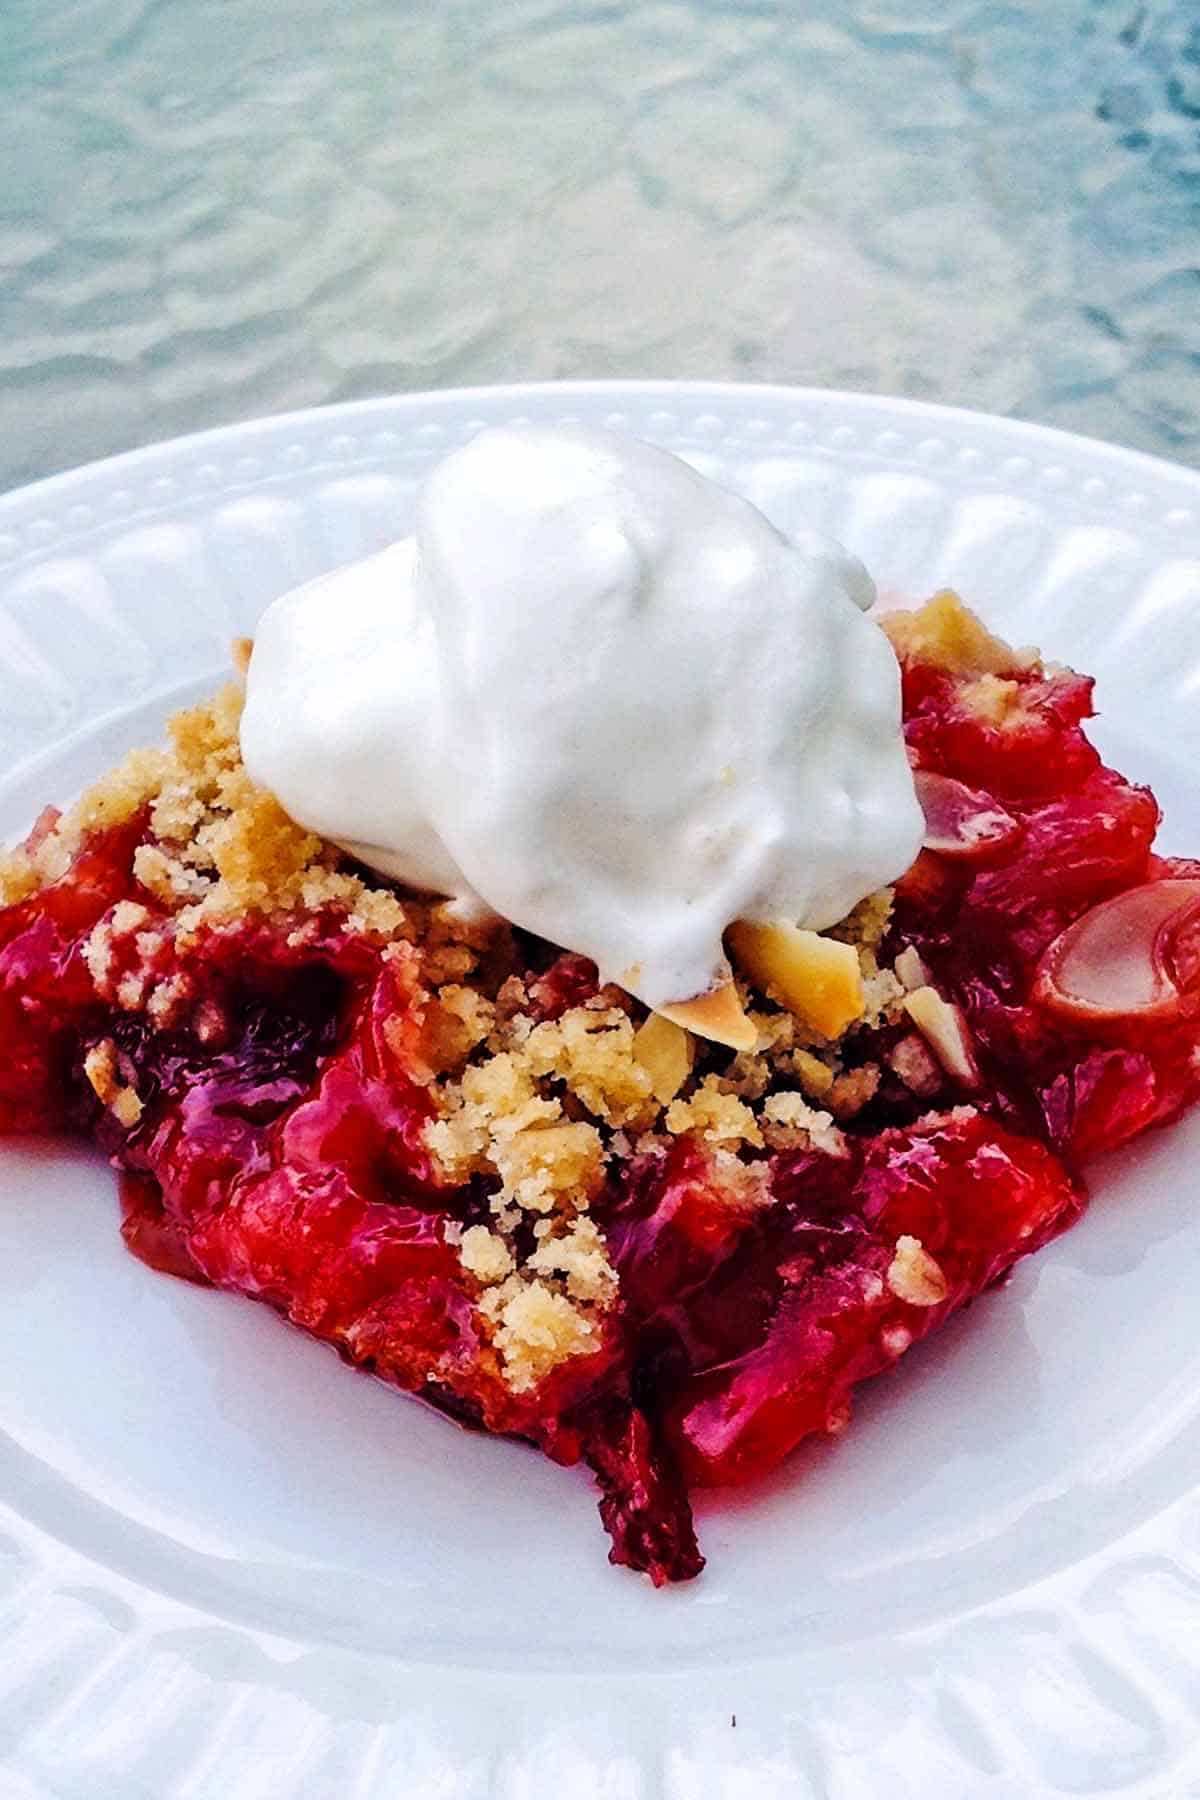 Rhubarb Crisp with whipped cream topping